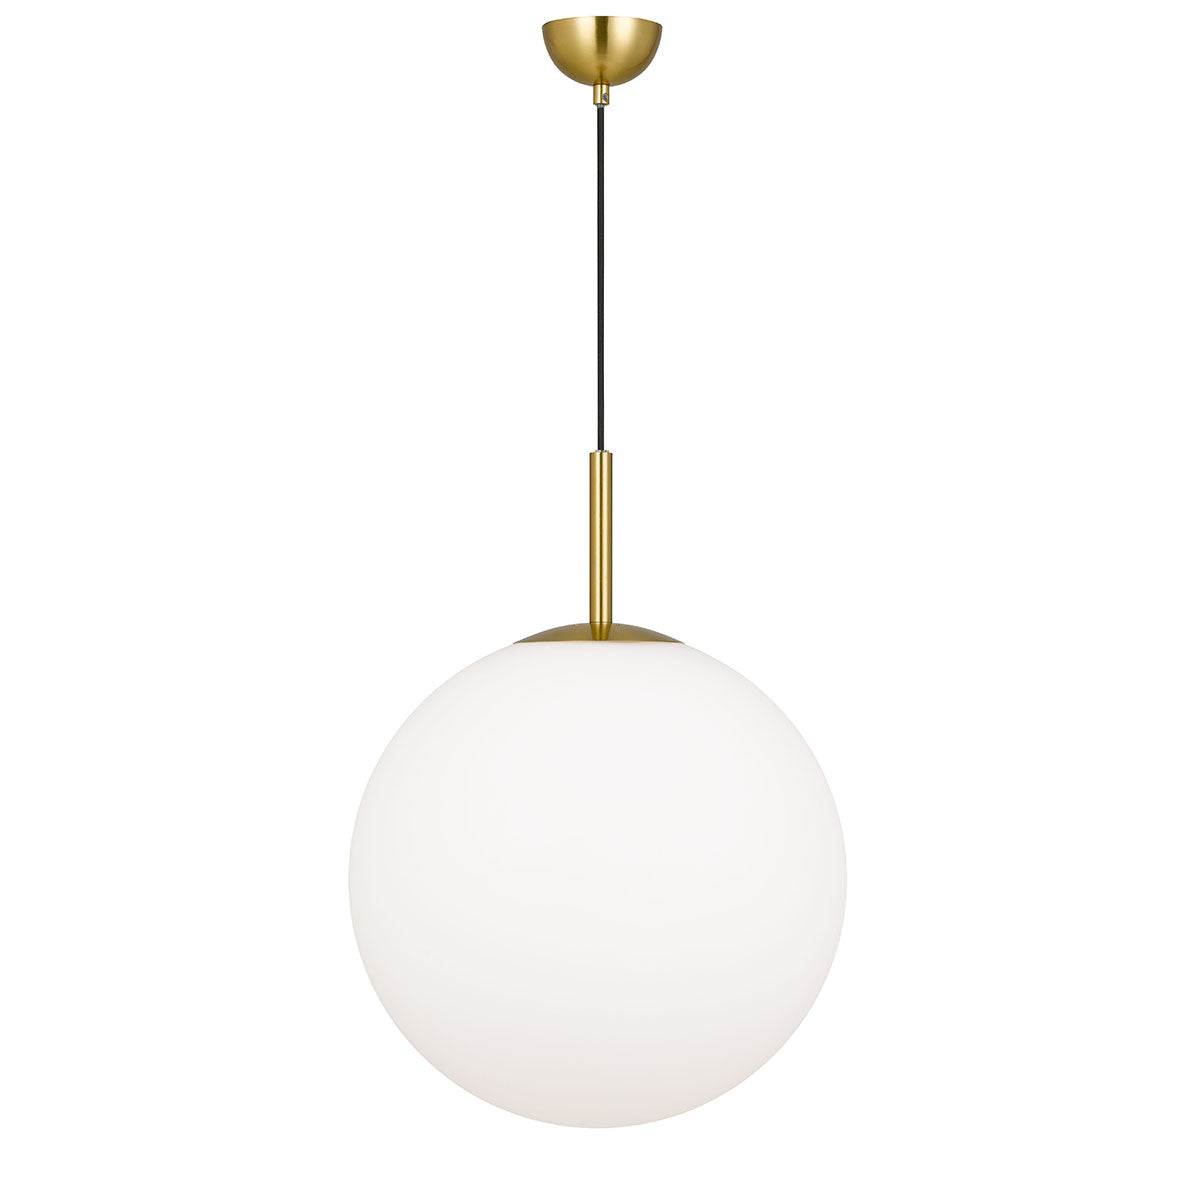 Bally 40cm Antique Gold with Opal Glass Modern Pendant